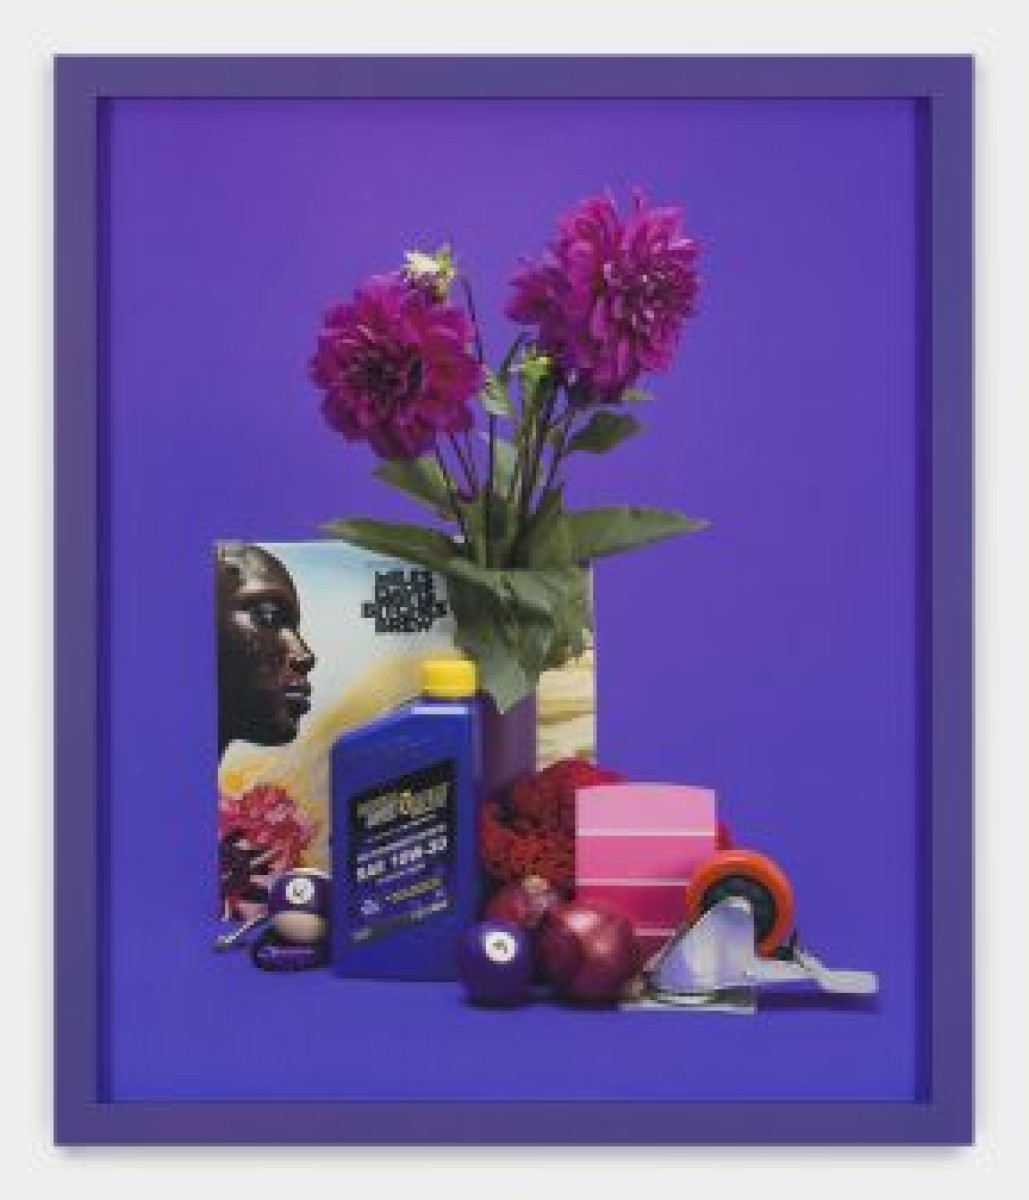 purple background with flowers and other objects